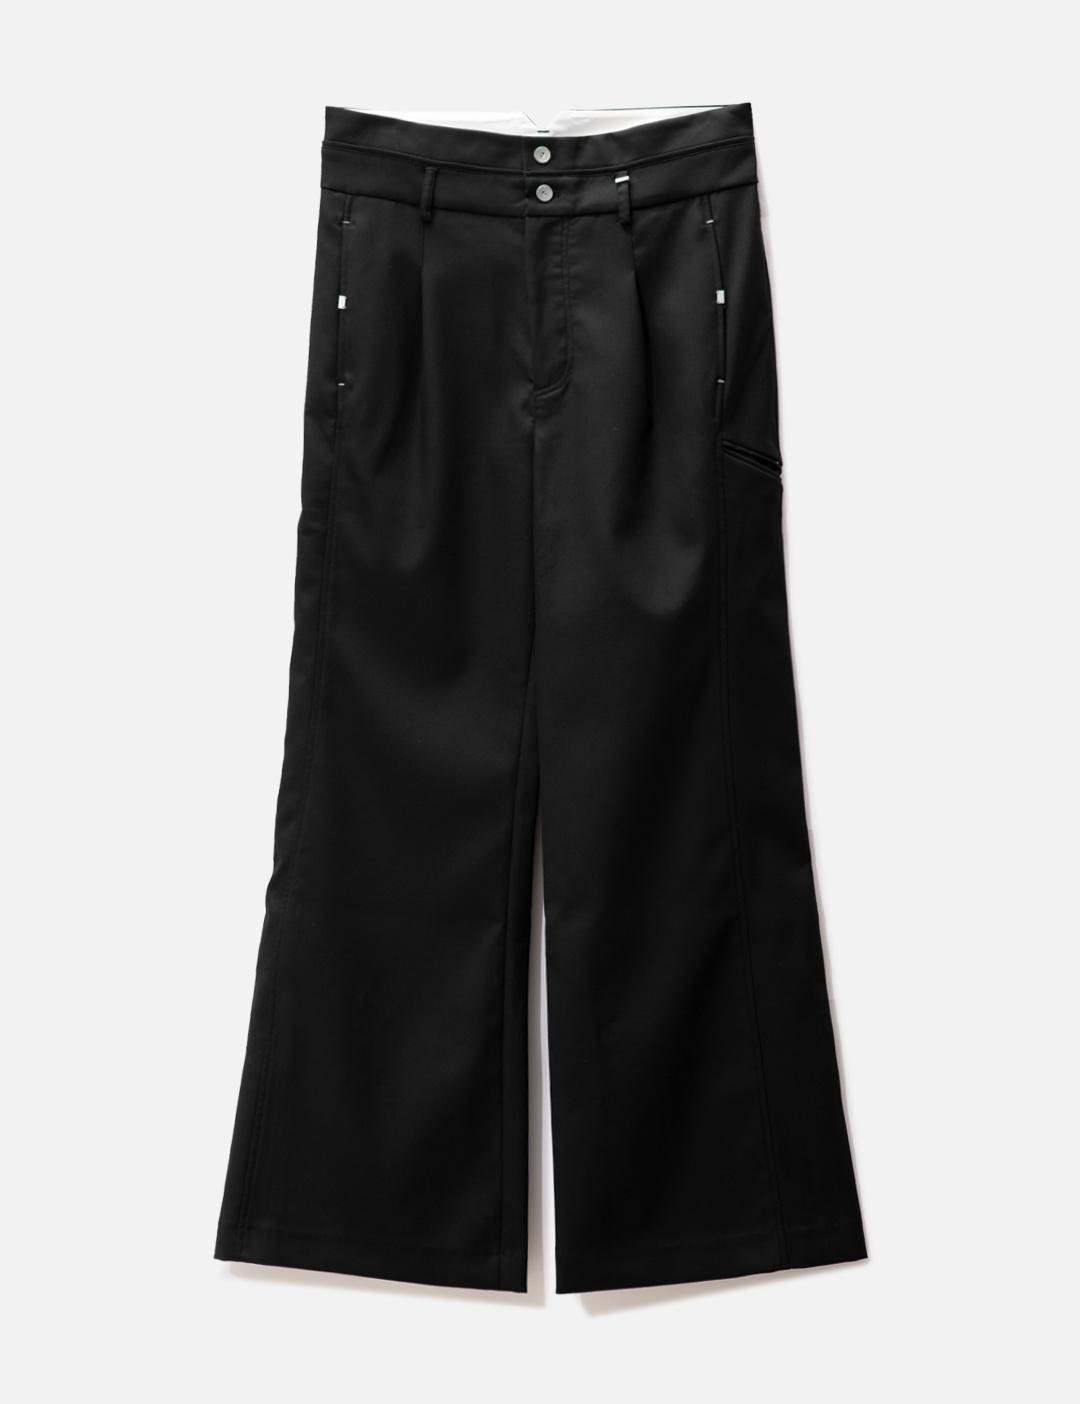 Profile Tailored Trousers by C2H4